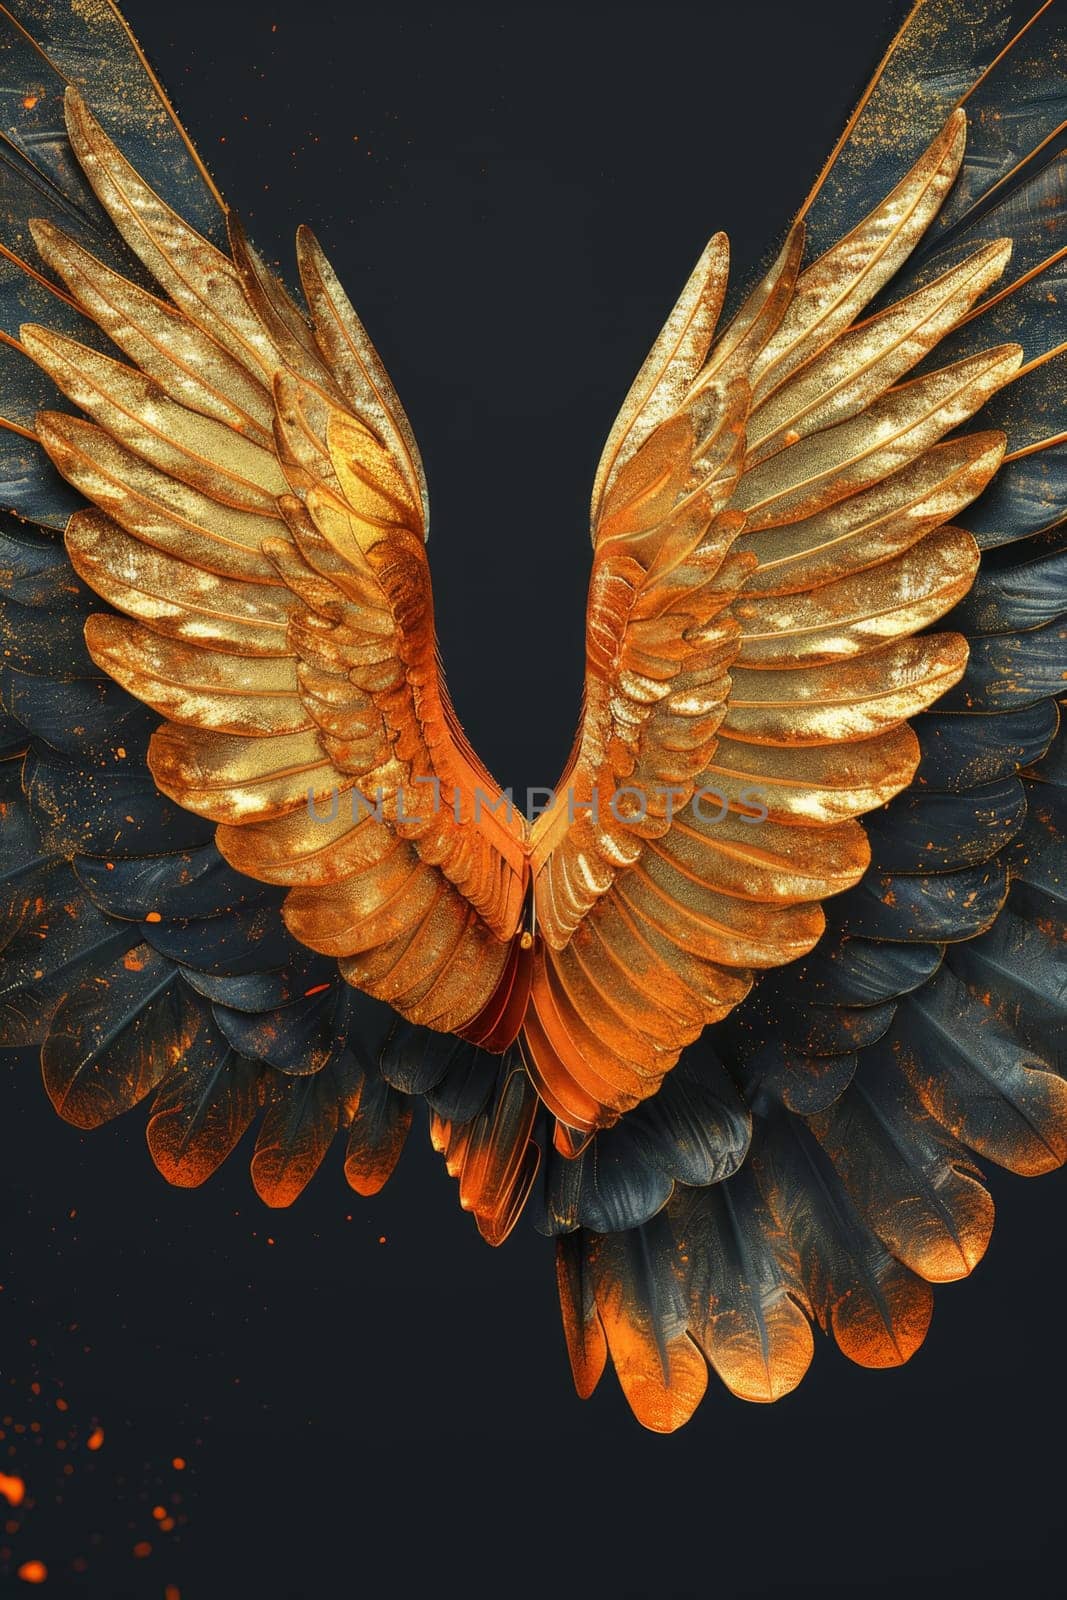 Golden wings on a black background. Illustration by Lobachad